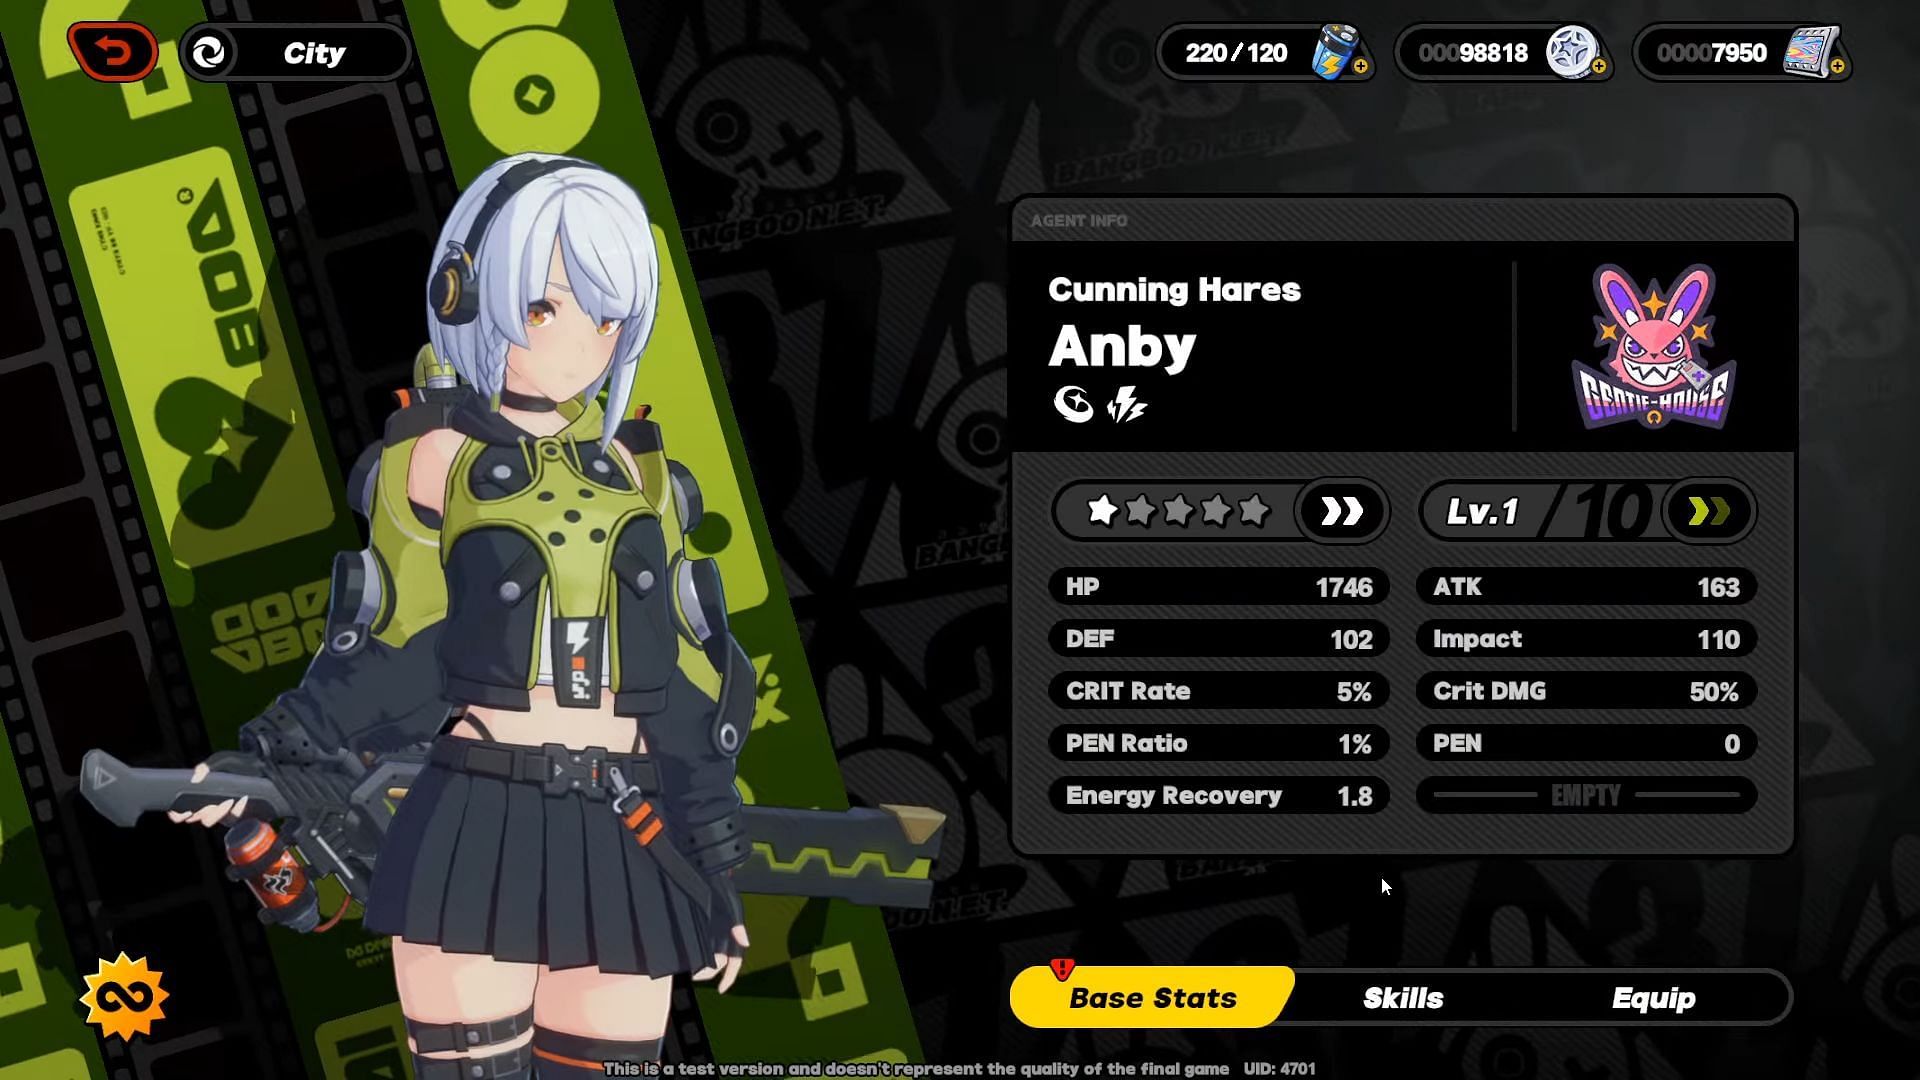 Zenless Zone Zero Introduces Its First Character, Anby Demara!